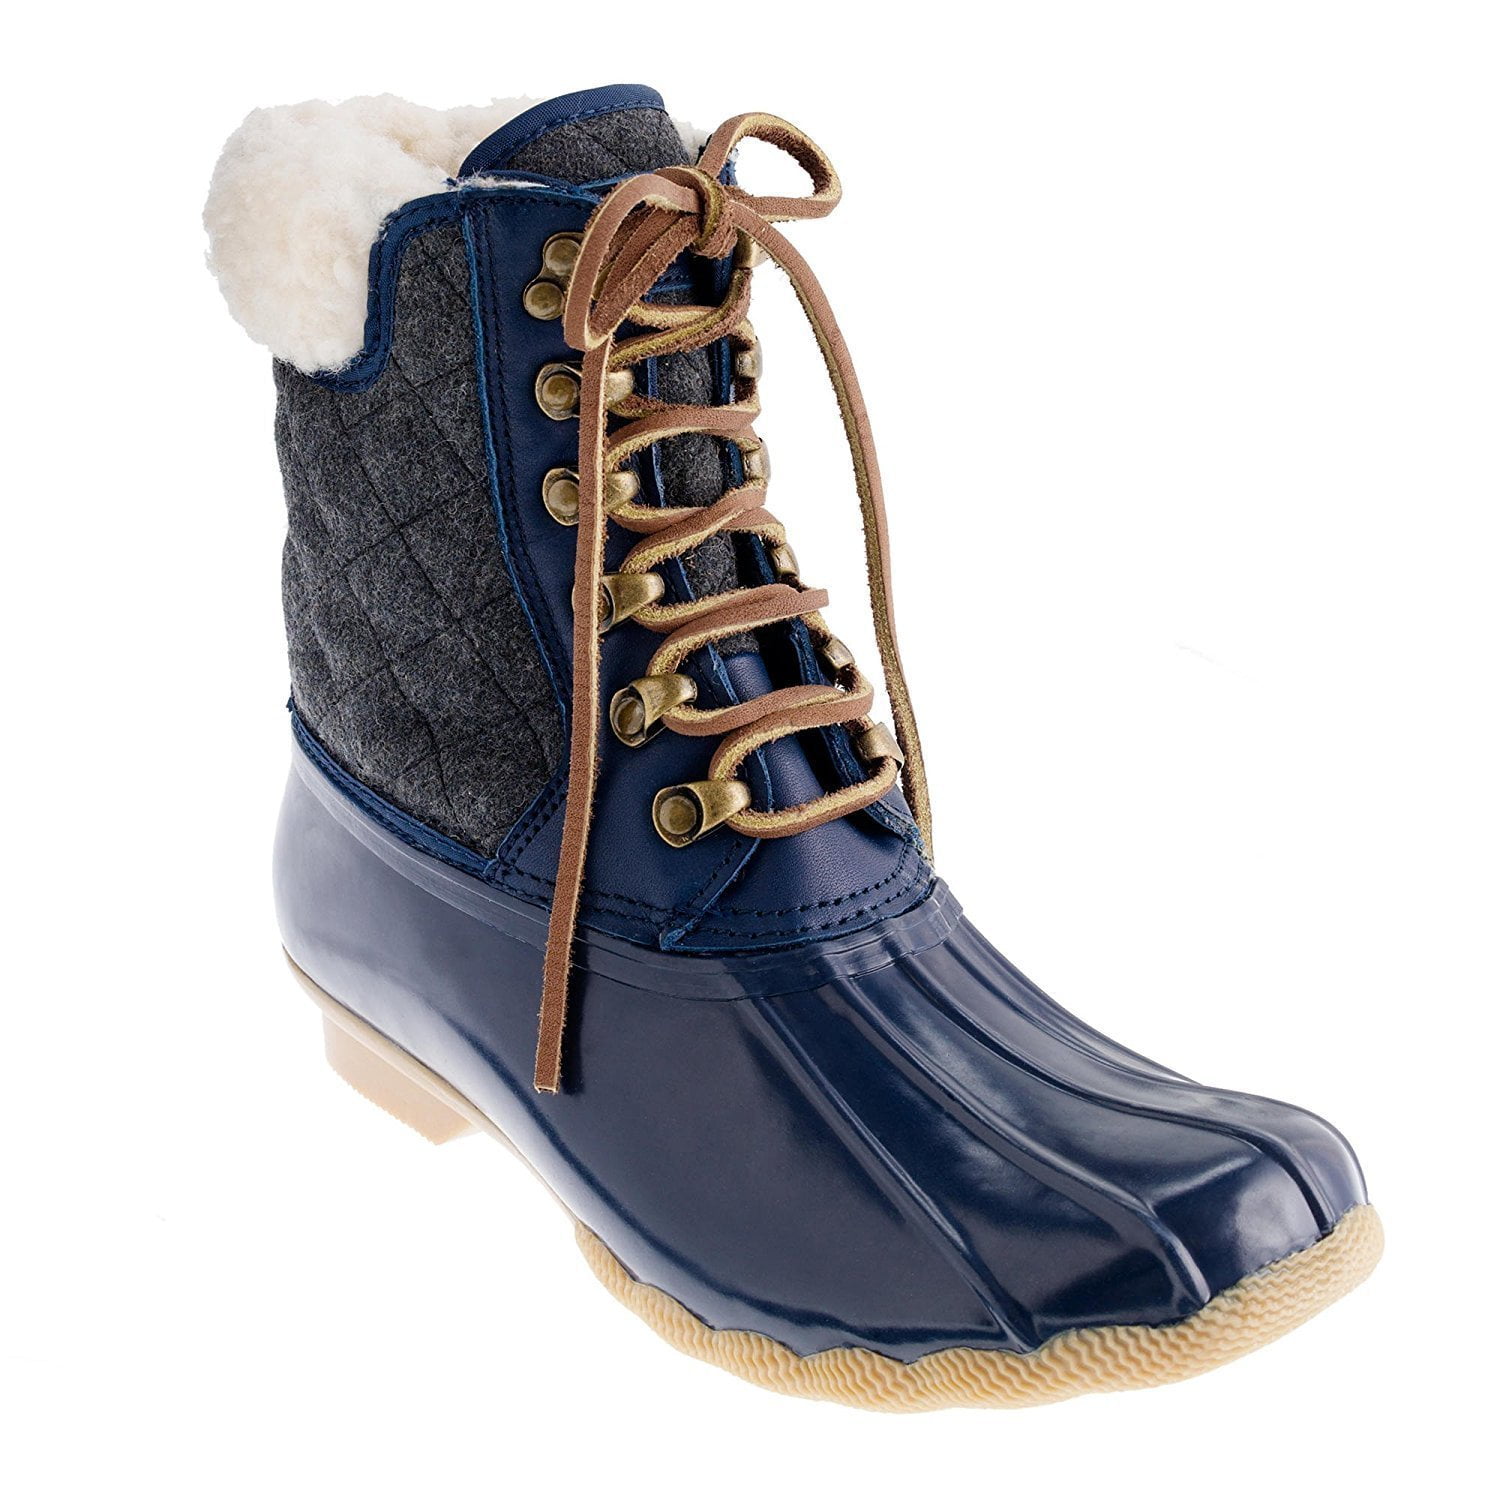 sperry top-sider women's shearwater rain boot (7 b(m) us, navy/charcoal ...